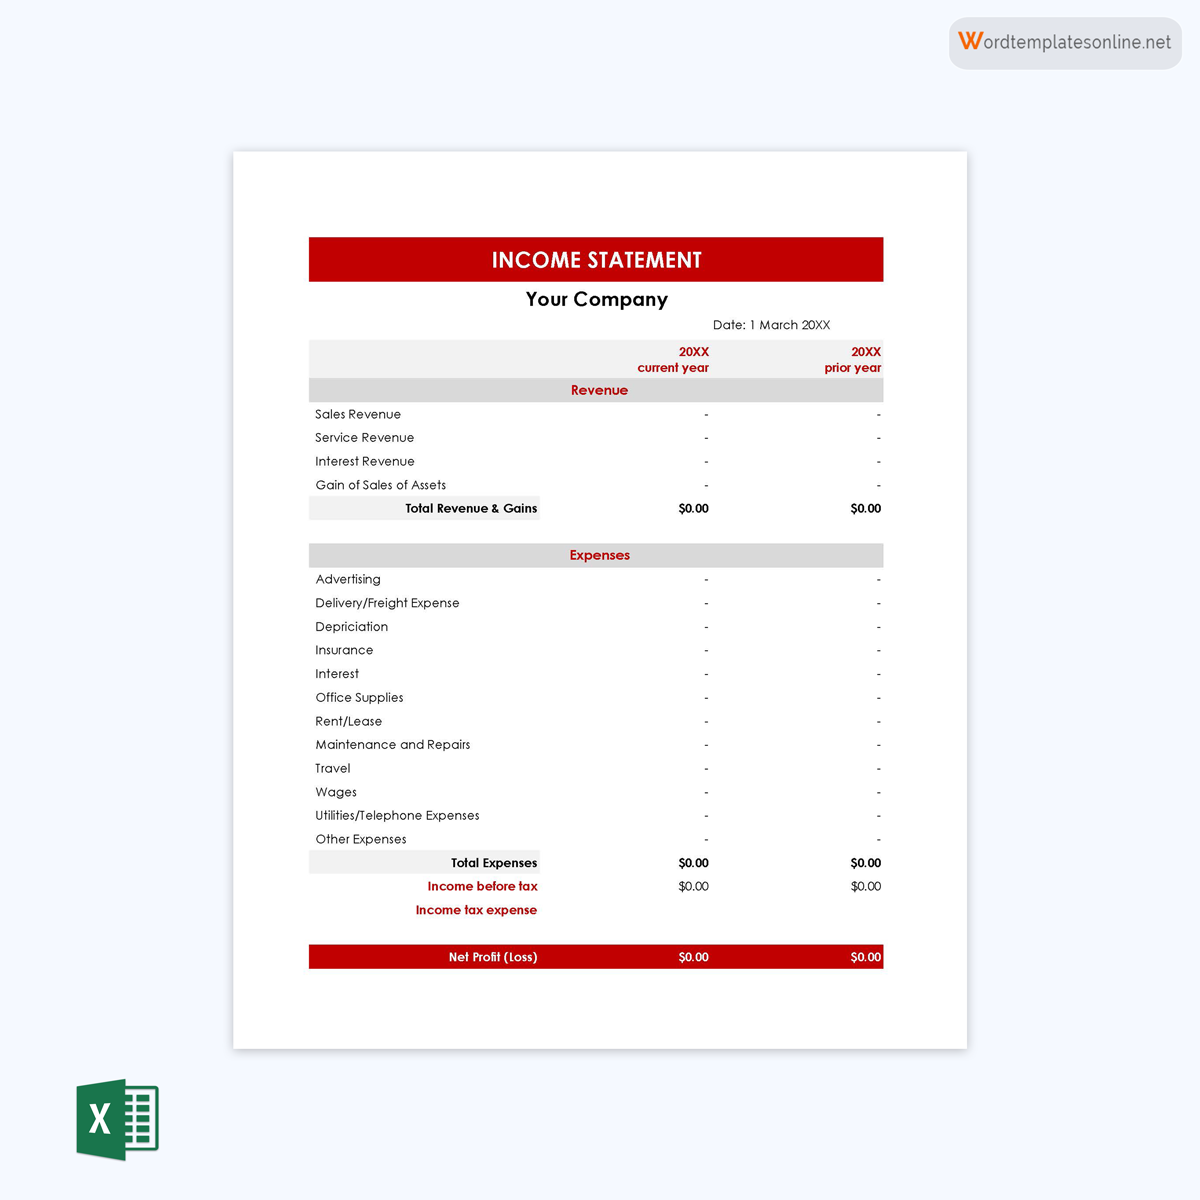 income statement format excel free download